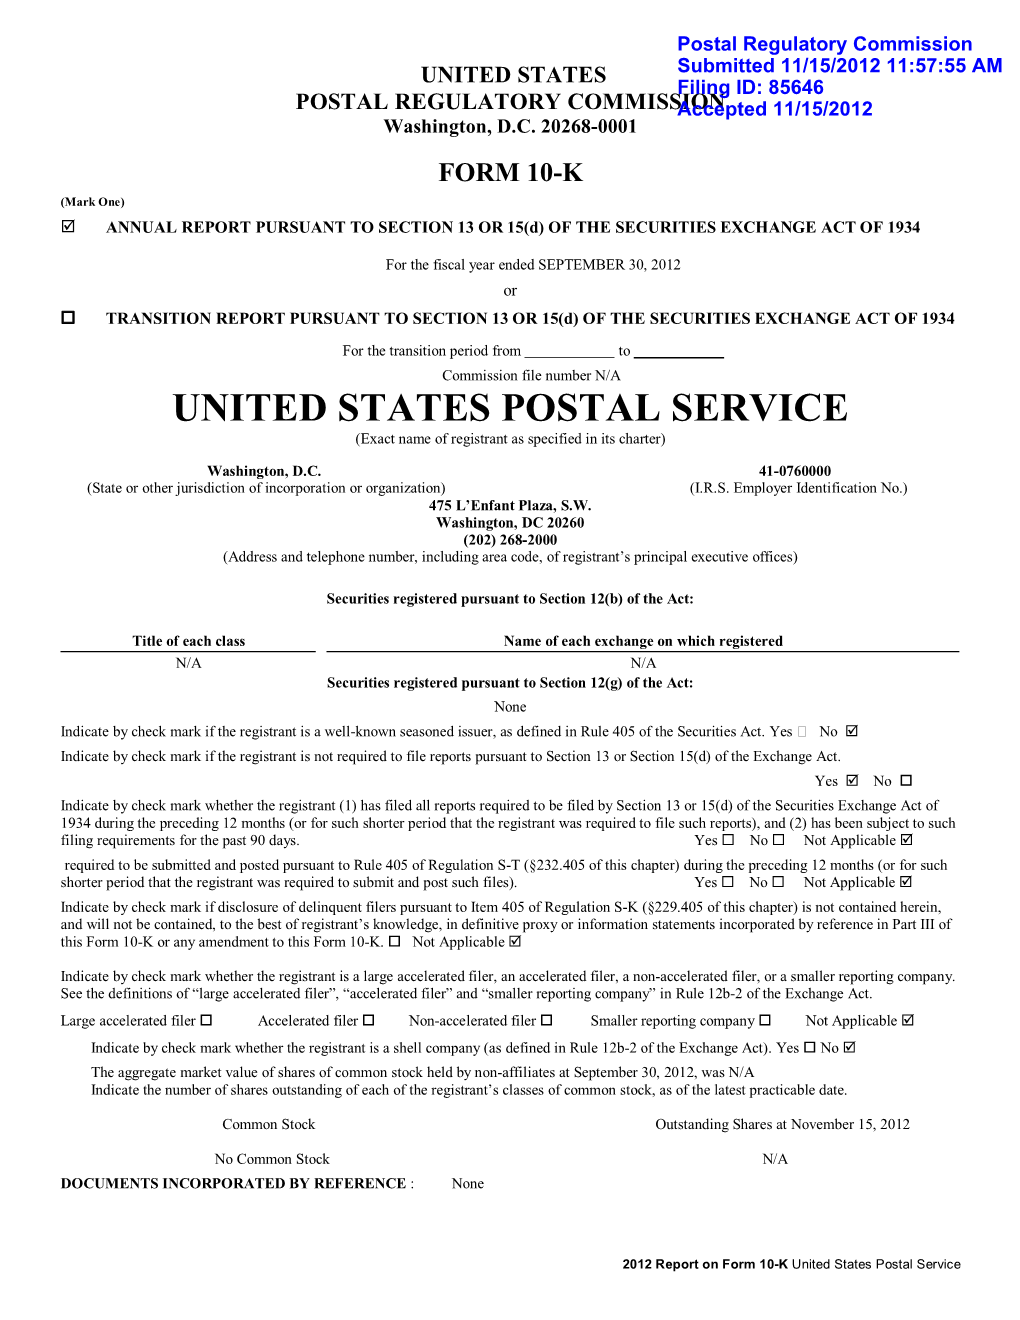 UNITED STATES POSTAL SERVICE (Exact Name of Registrant As Specified in Its Charter)